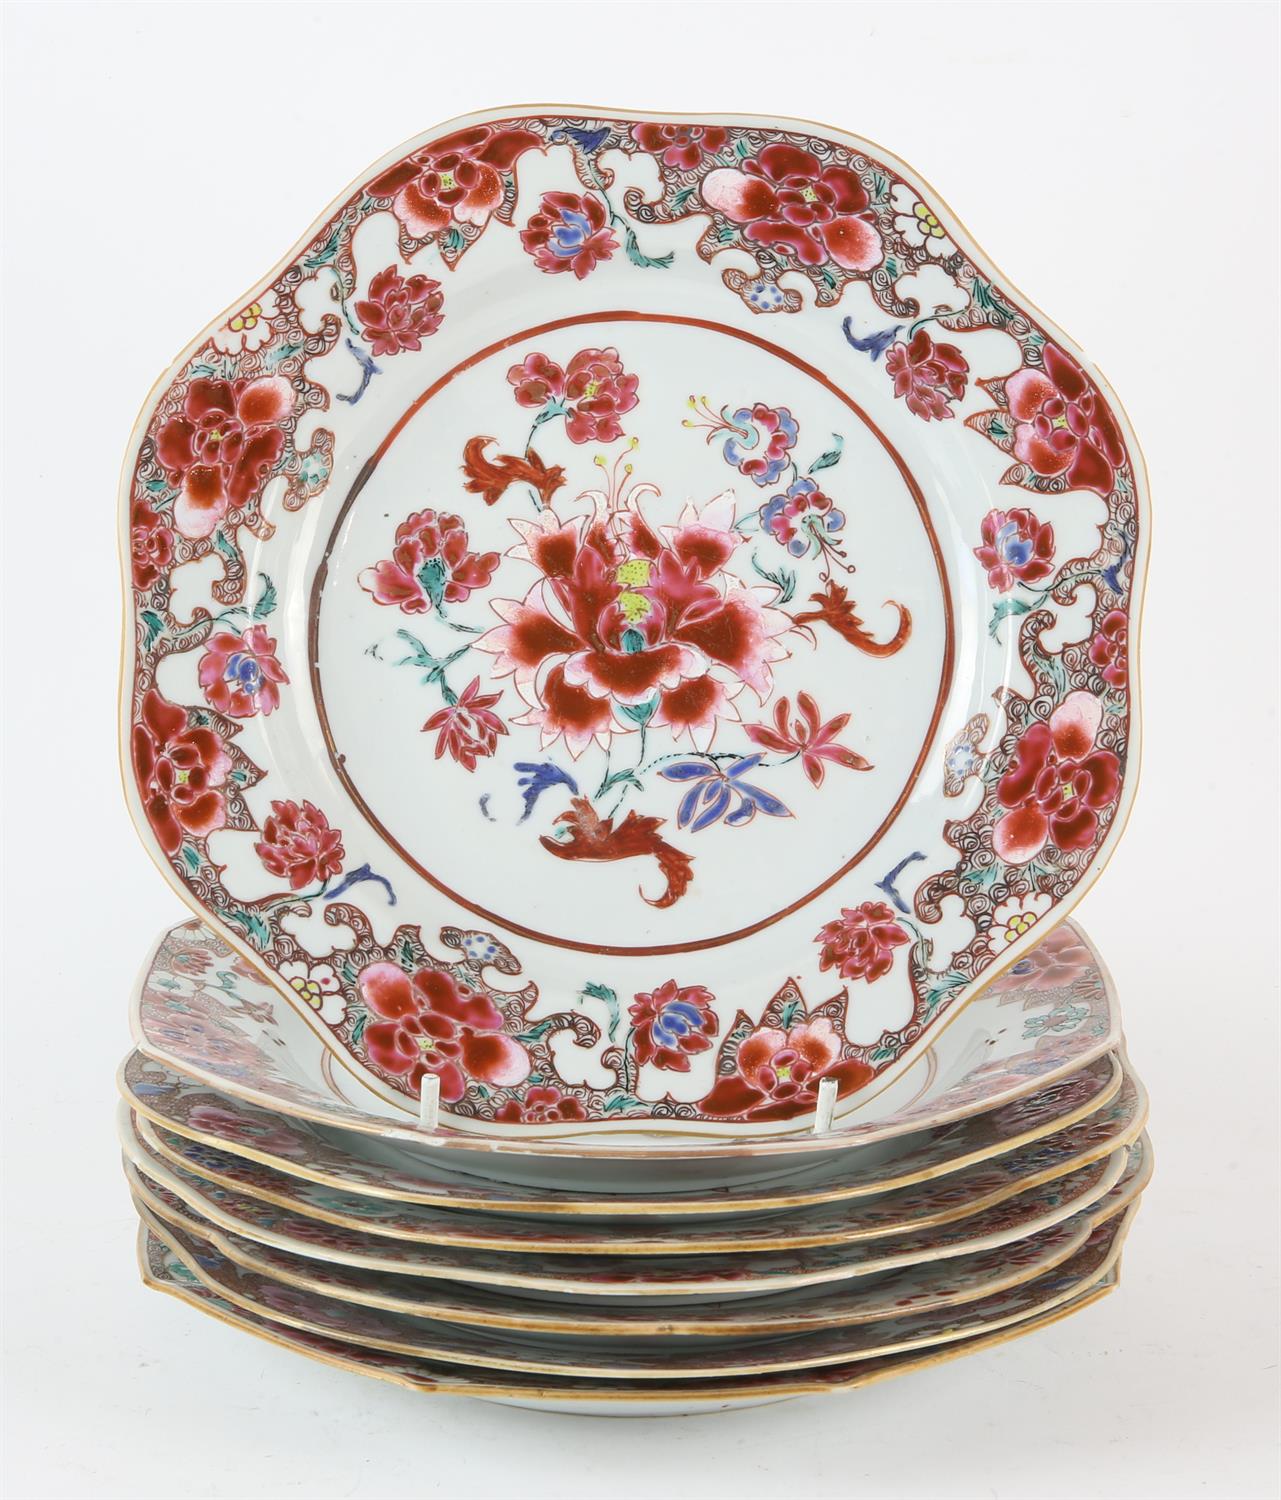 Eight famille rose dishes; each one decorated with floral designs and about 22.5 cm diameter - Image 2 of 14